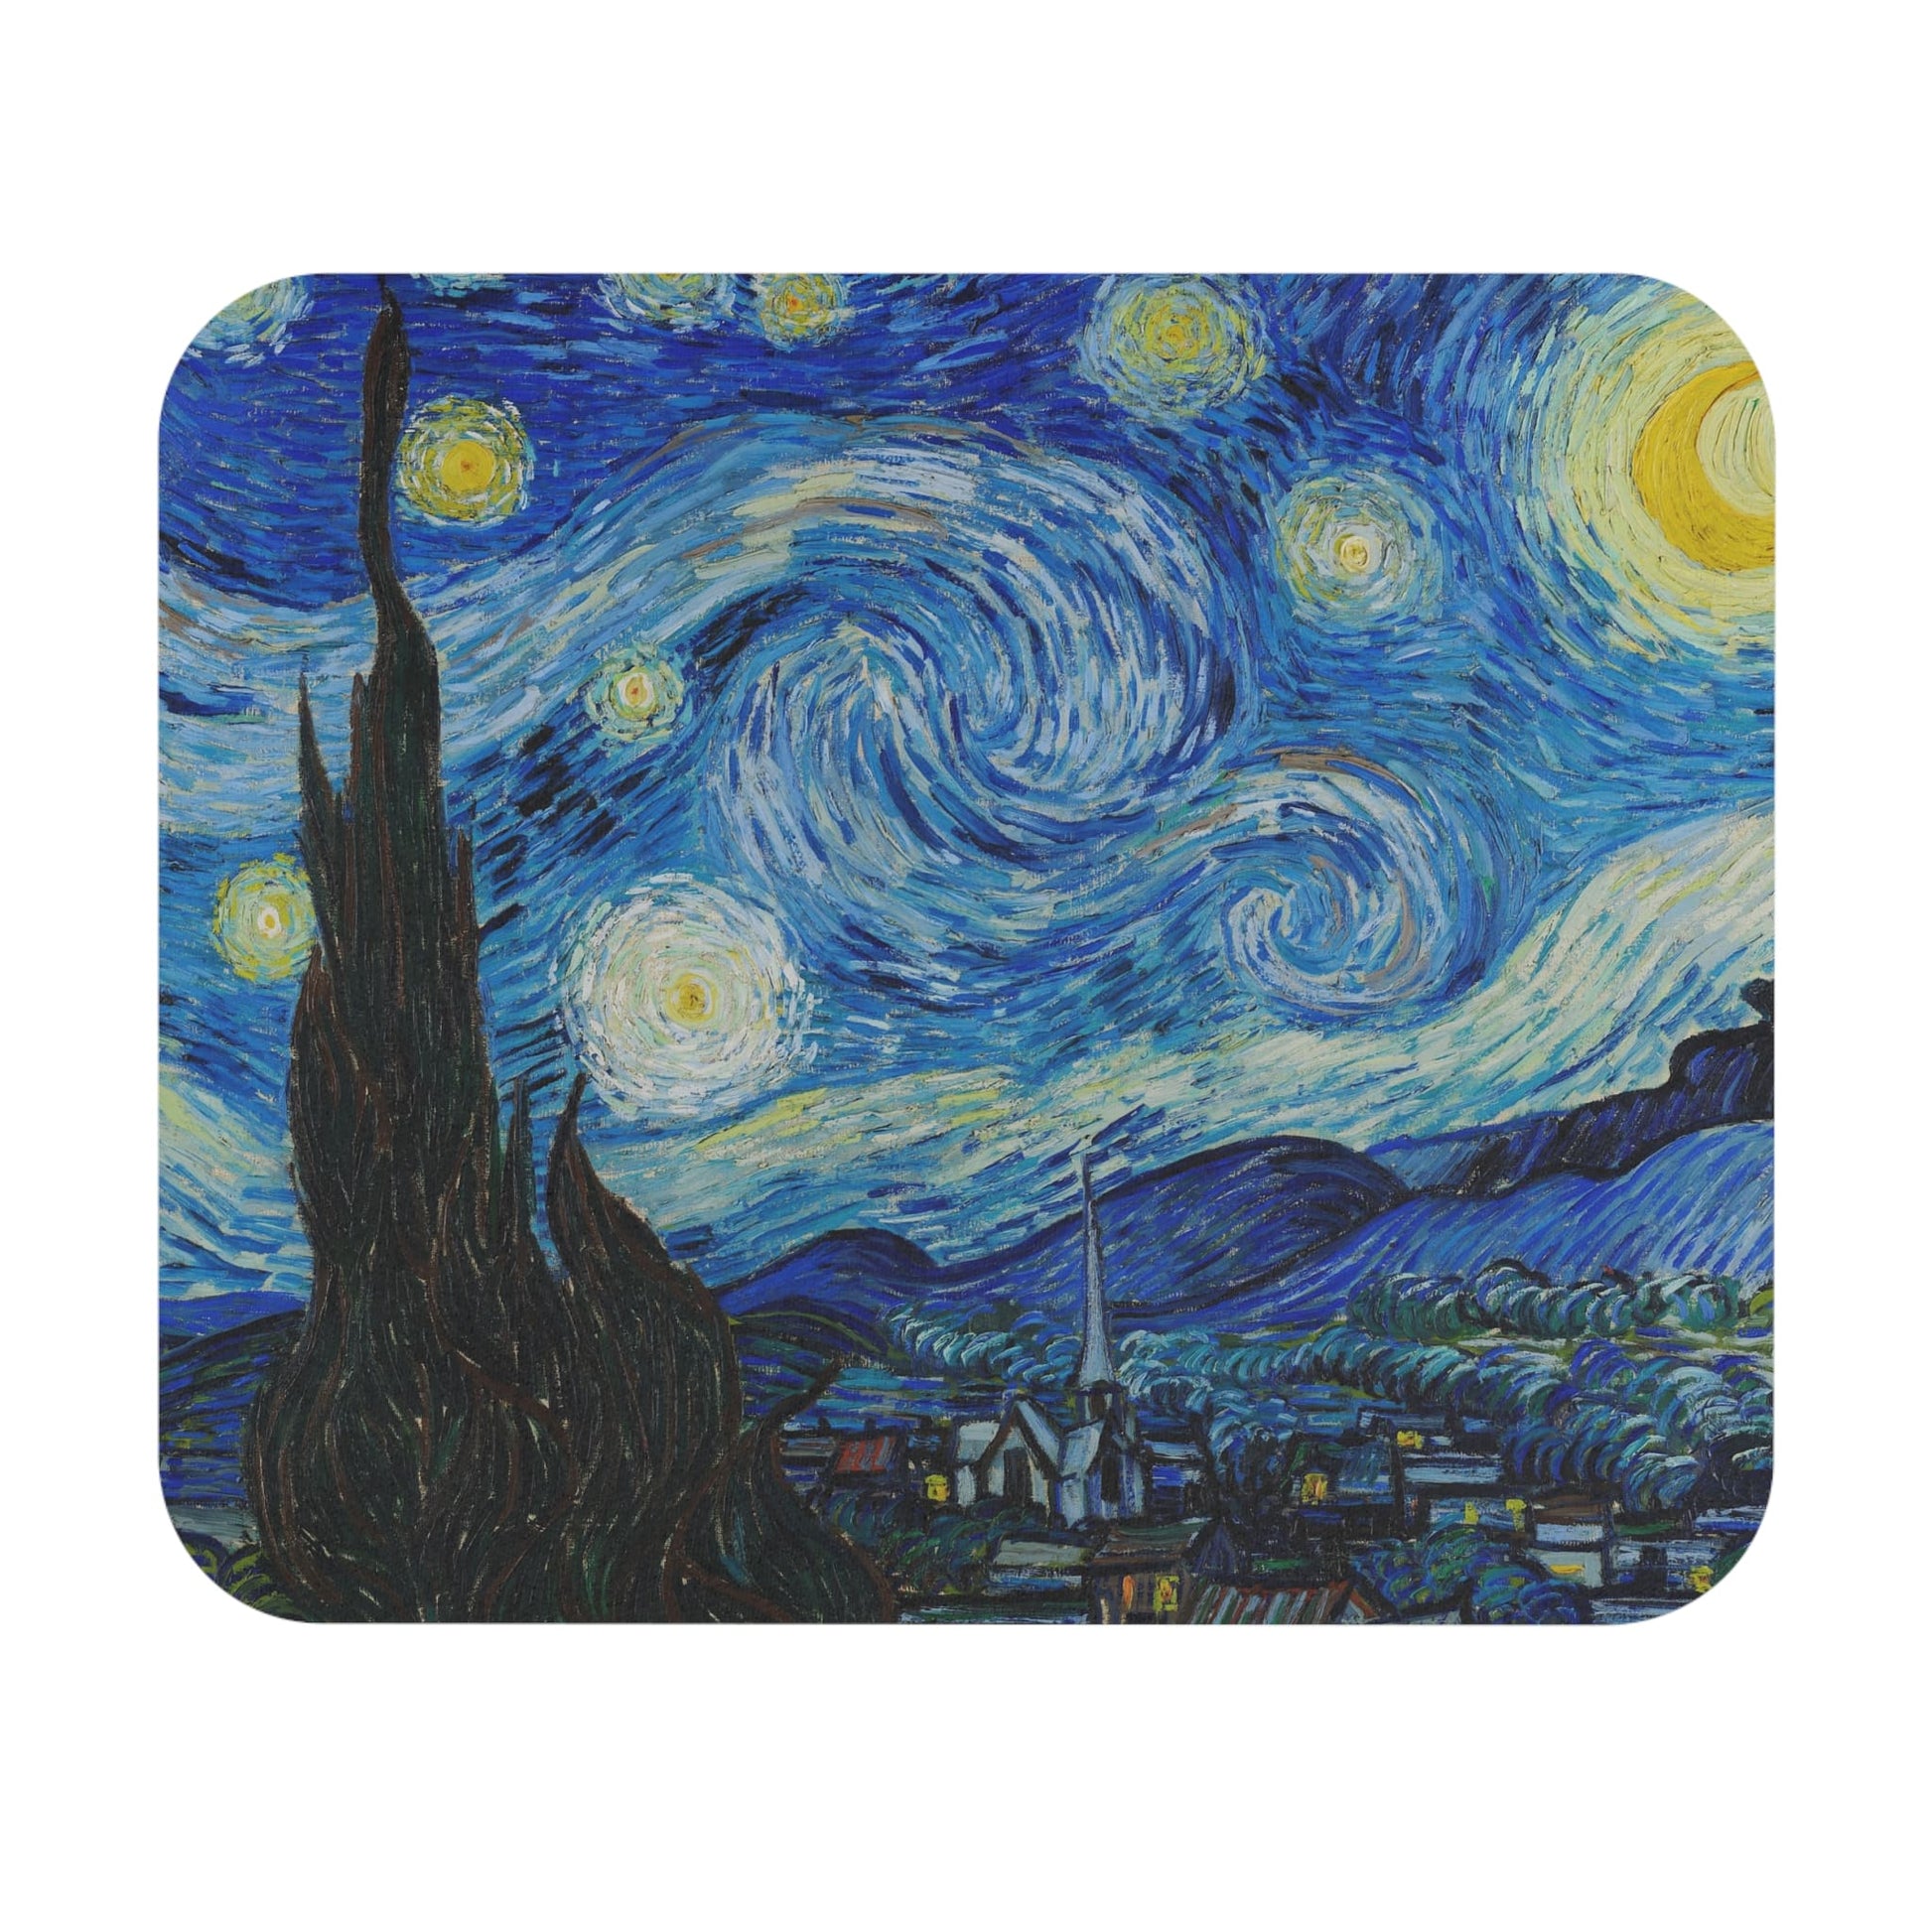 The Starry Night Mouse Pad with Vincent van Gogh art, desk and office decor featuring the famous Starry Night painting.